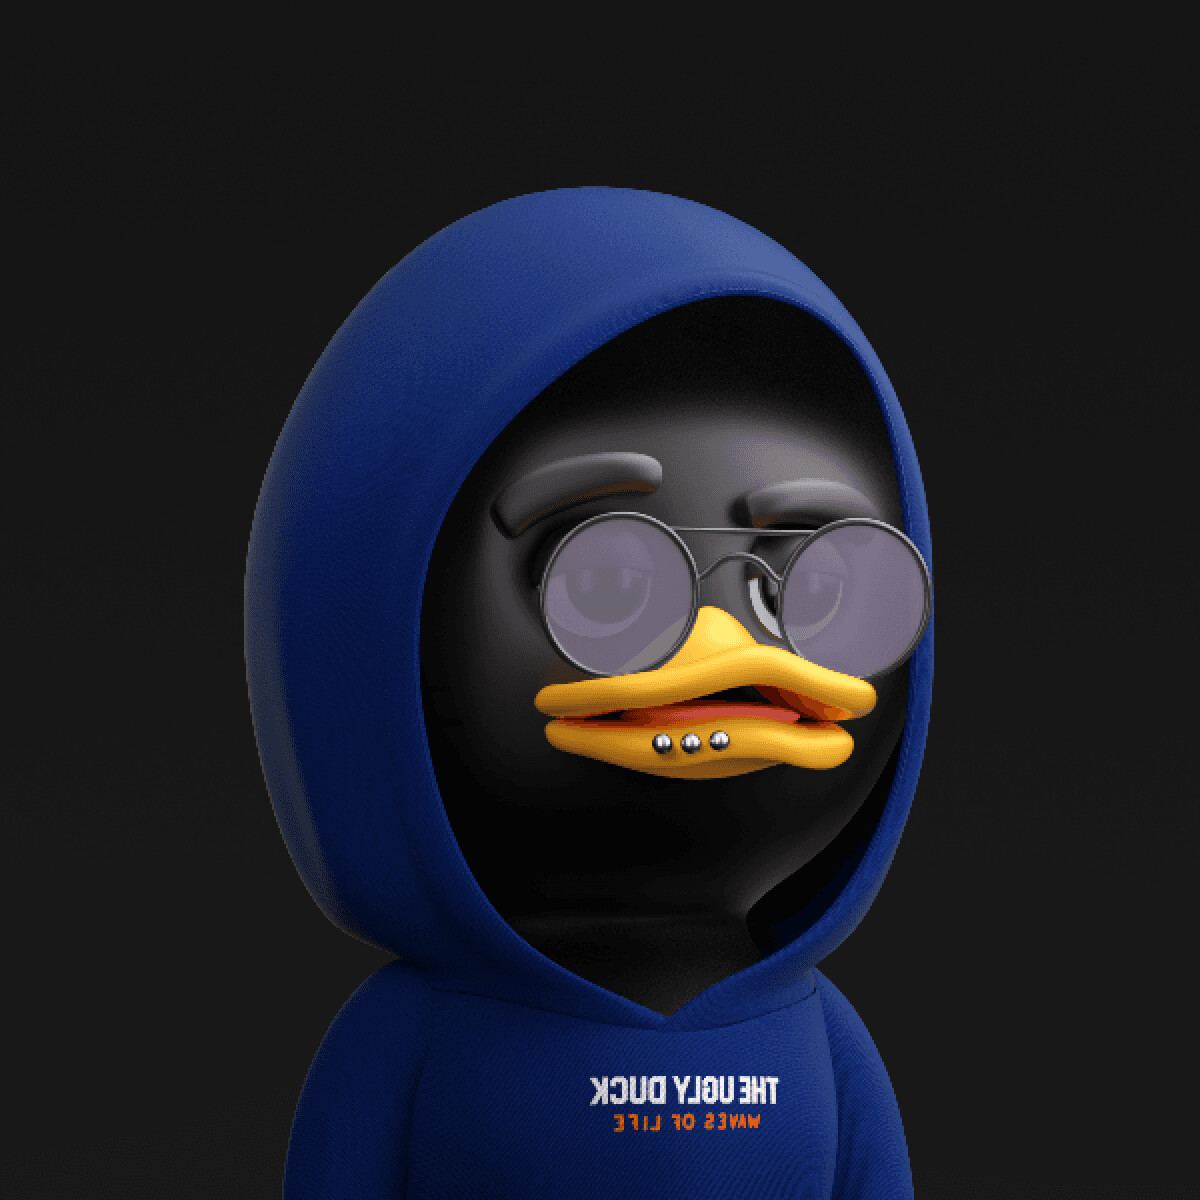 ArtStation - Royal Ugly Duck Official x ApexPixel